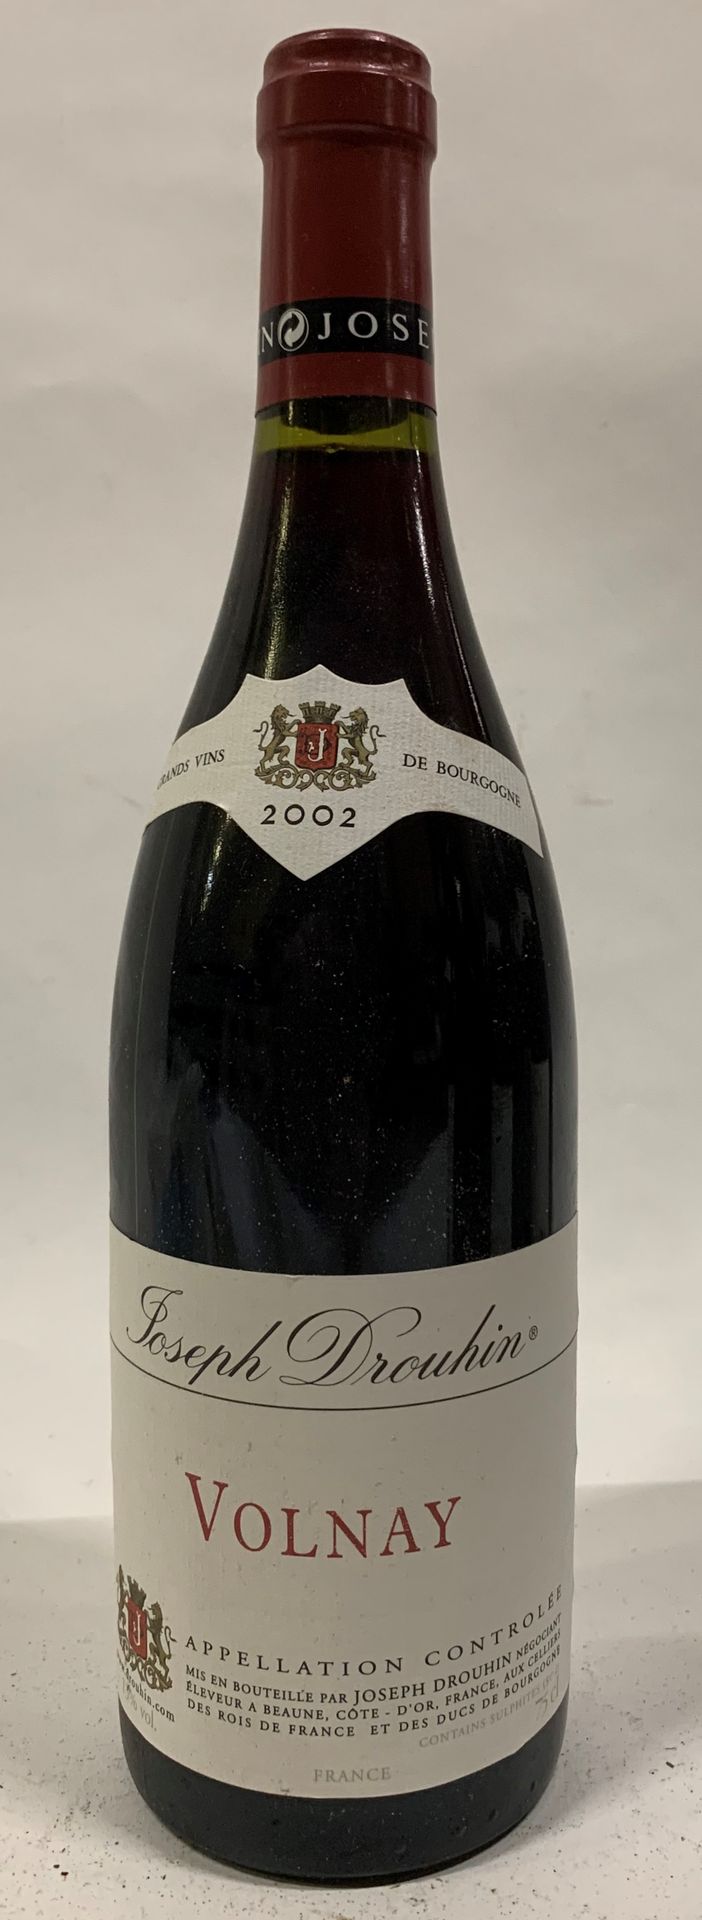 Null ● VOLNAY | Joseph Drouhin, 2002

6 bouteilles

Réf. 99